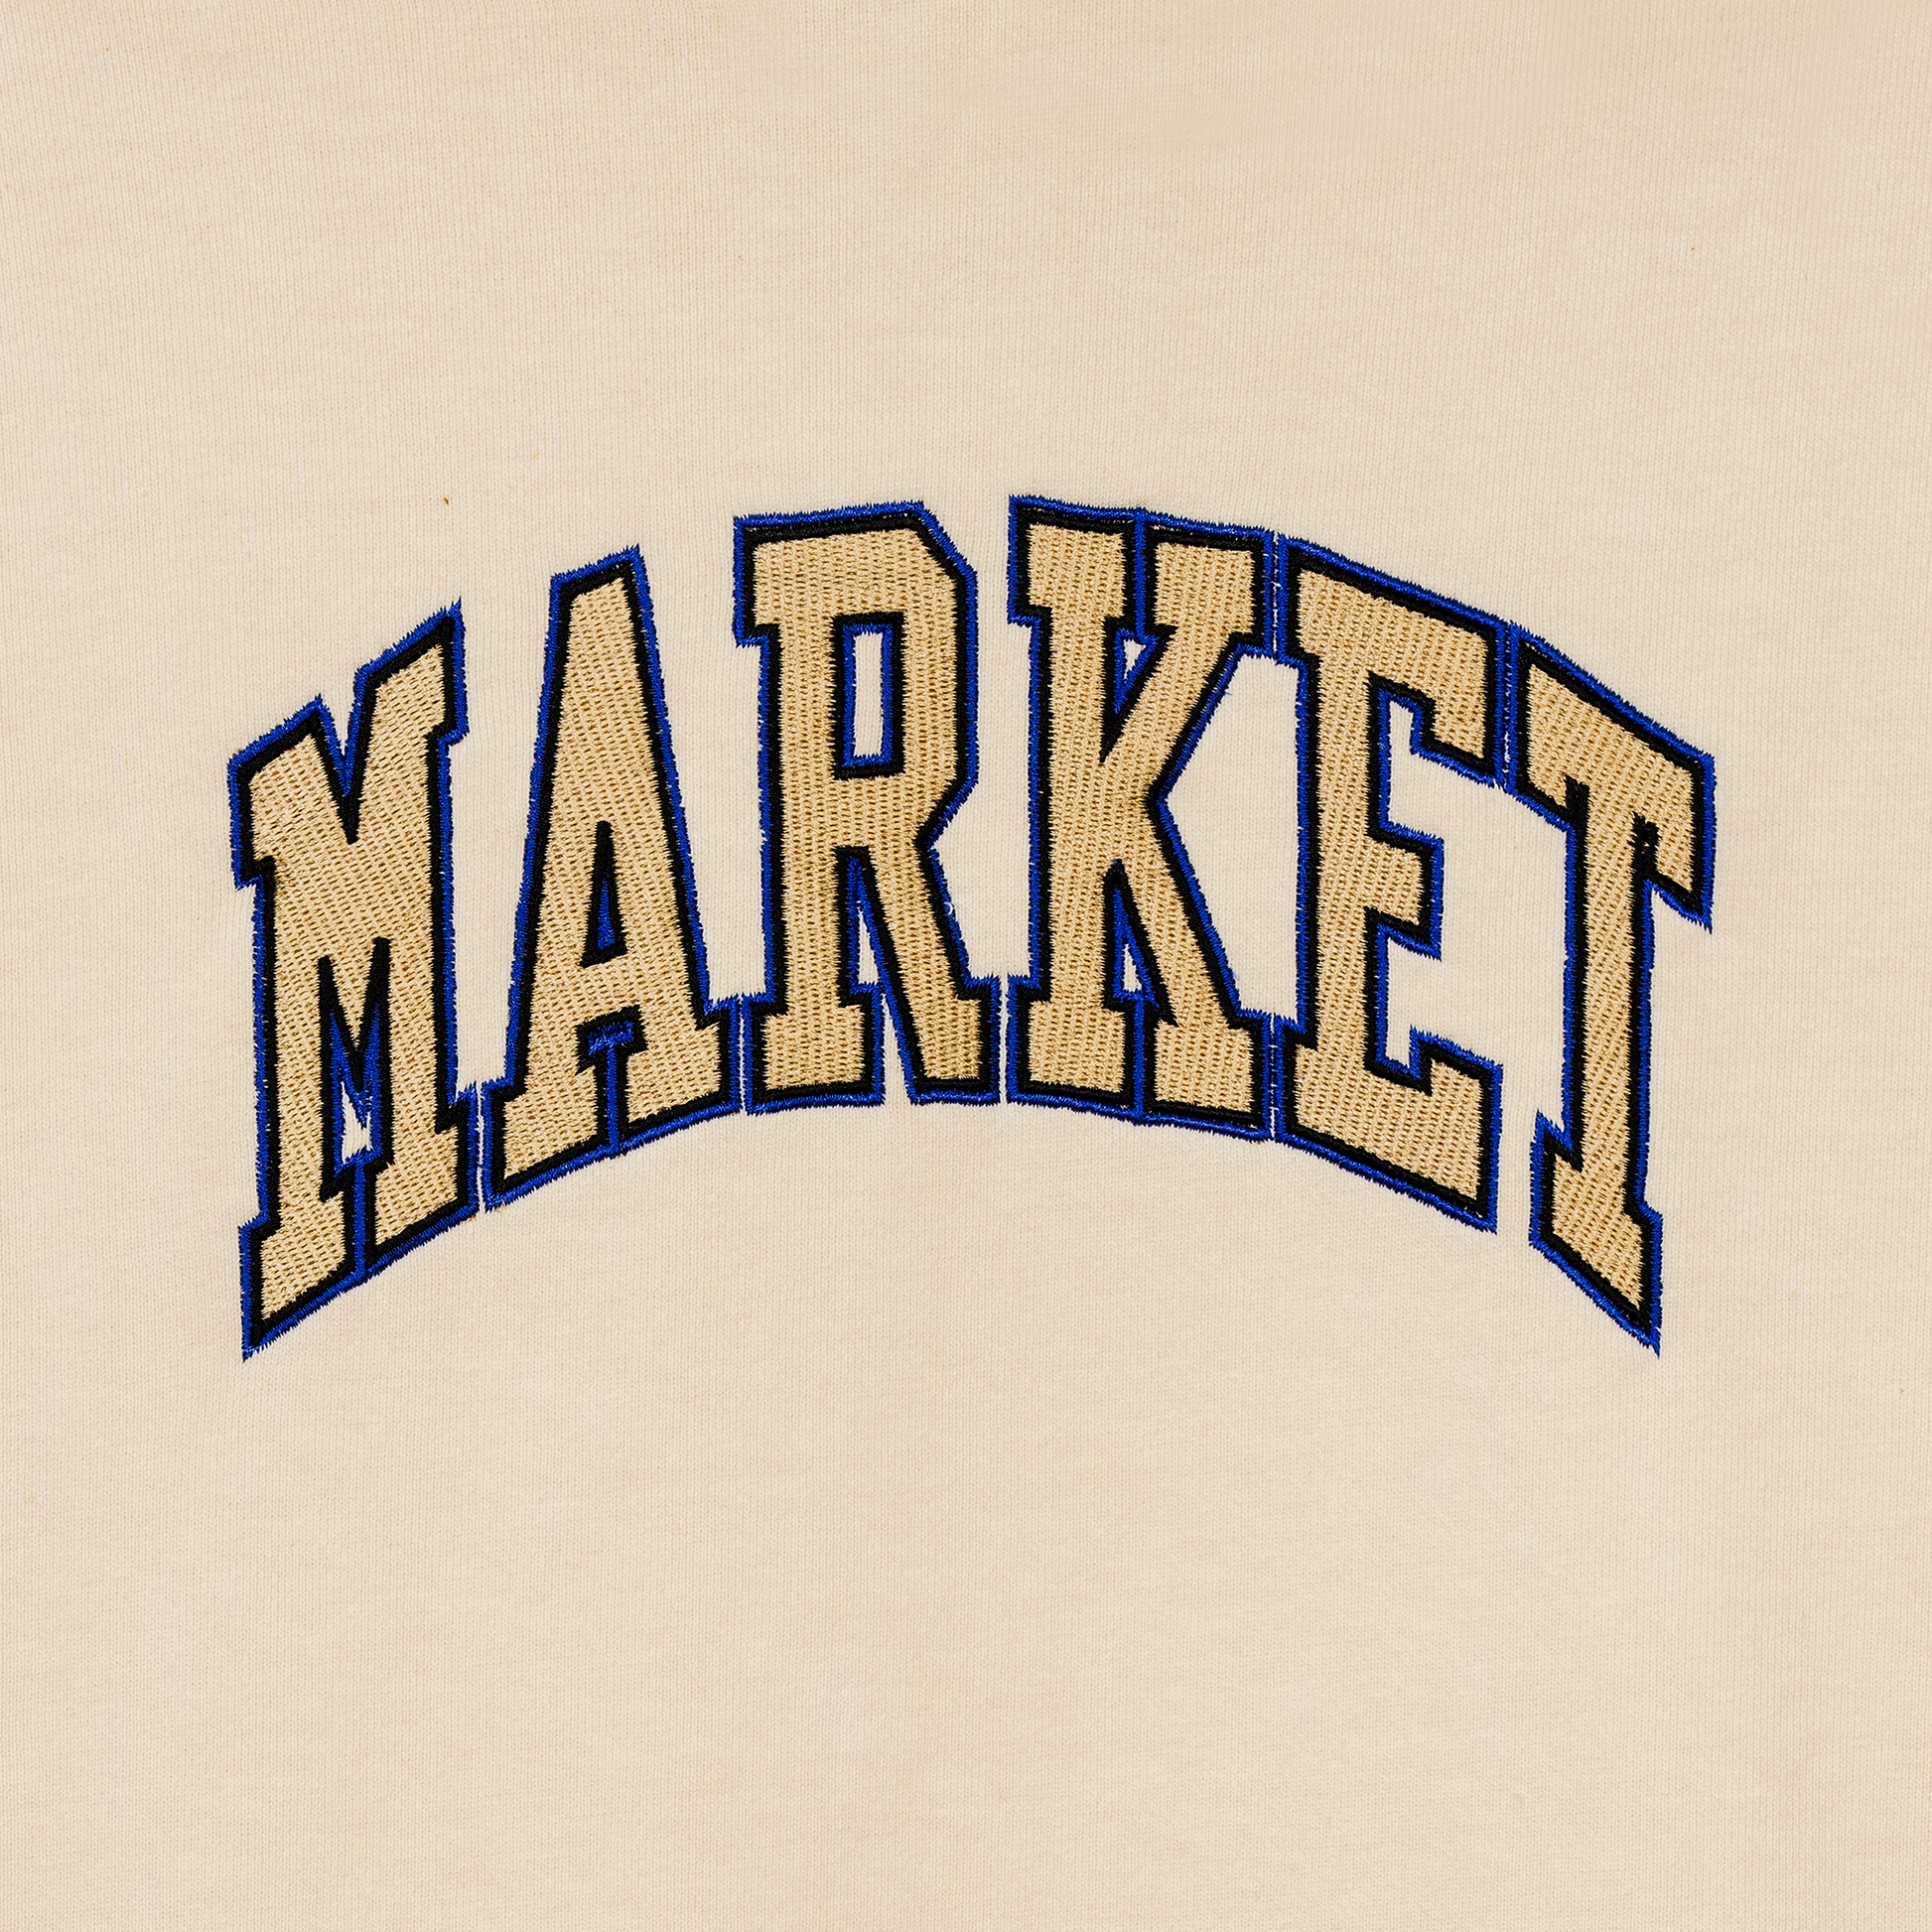 MARKET clothing brand TRIPLE STITCH PULLOVER HOODIE. Find more graphic tees, hats and more at MarketStudios.com. Formally Chinatown Market.